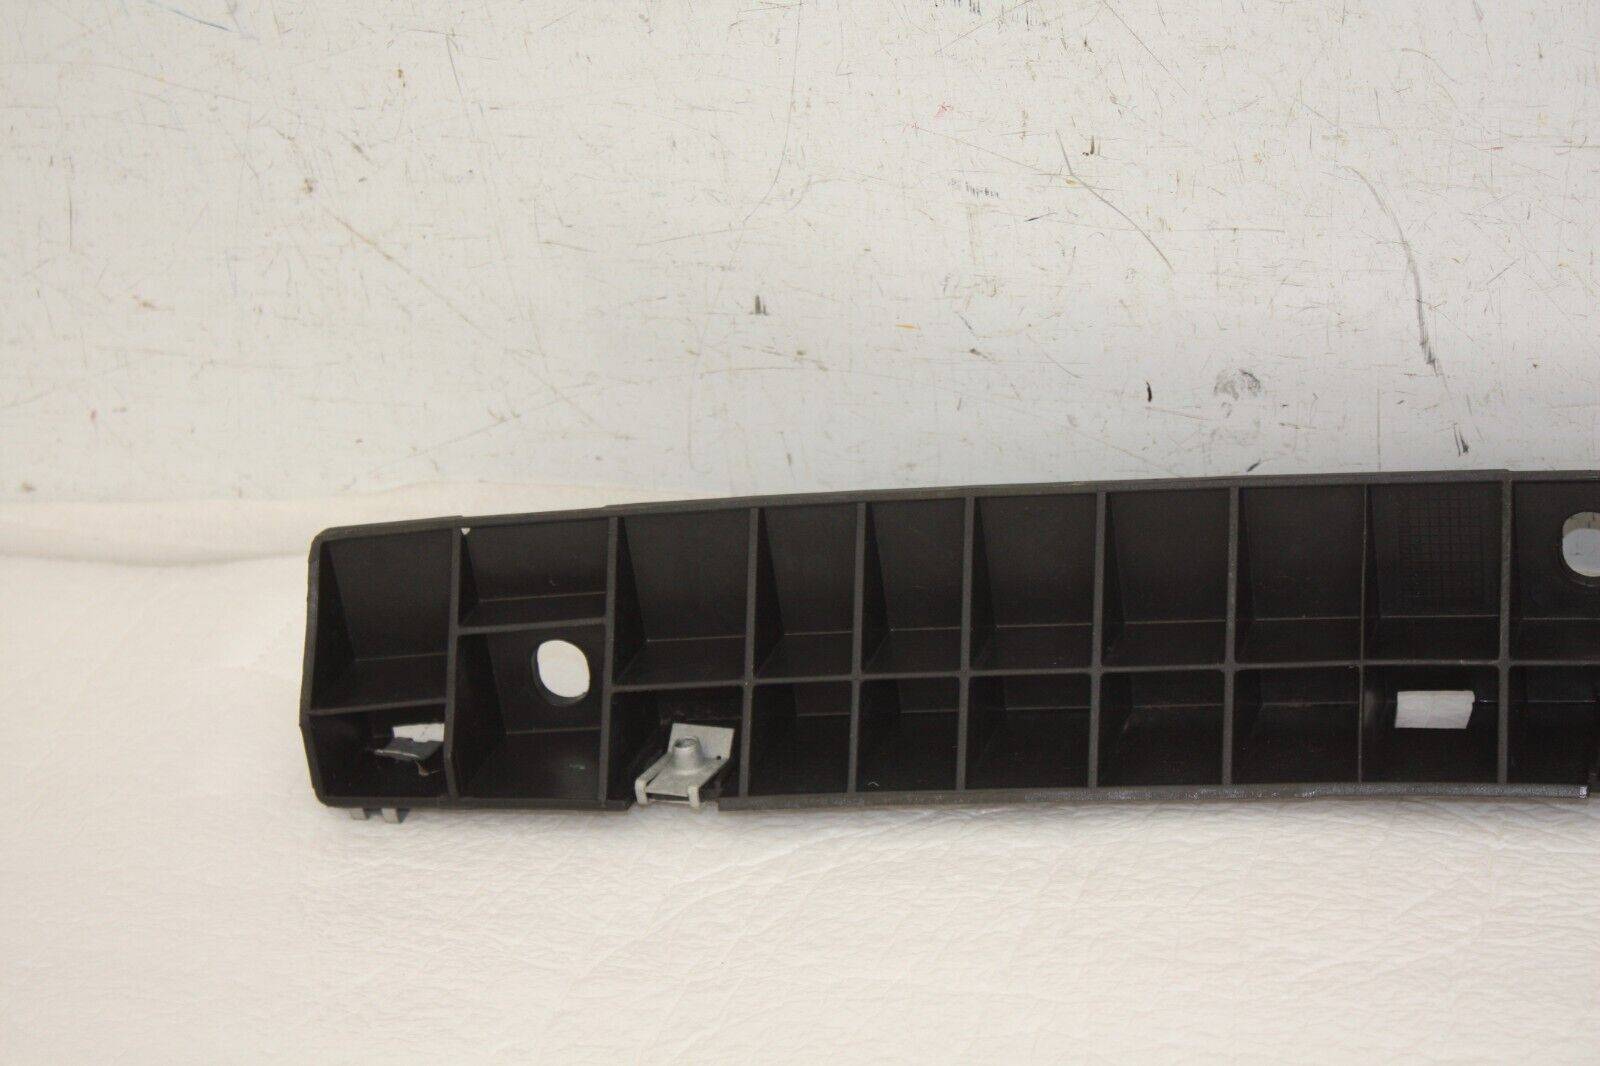 BMW-2-3-Series-Front-Air-Induct-Grill-Shutter-Bracket-517415677210-Genuine-176375091912-10